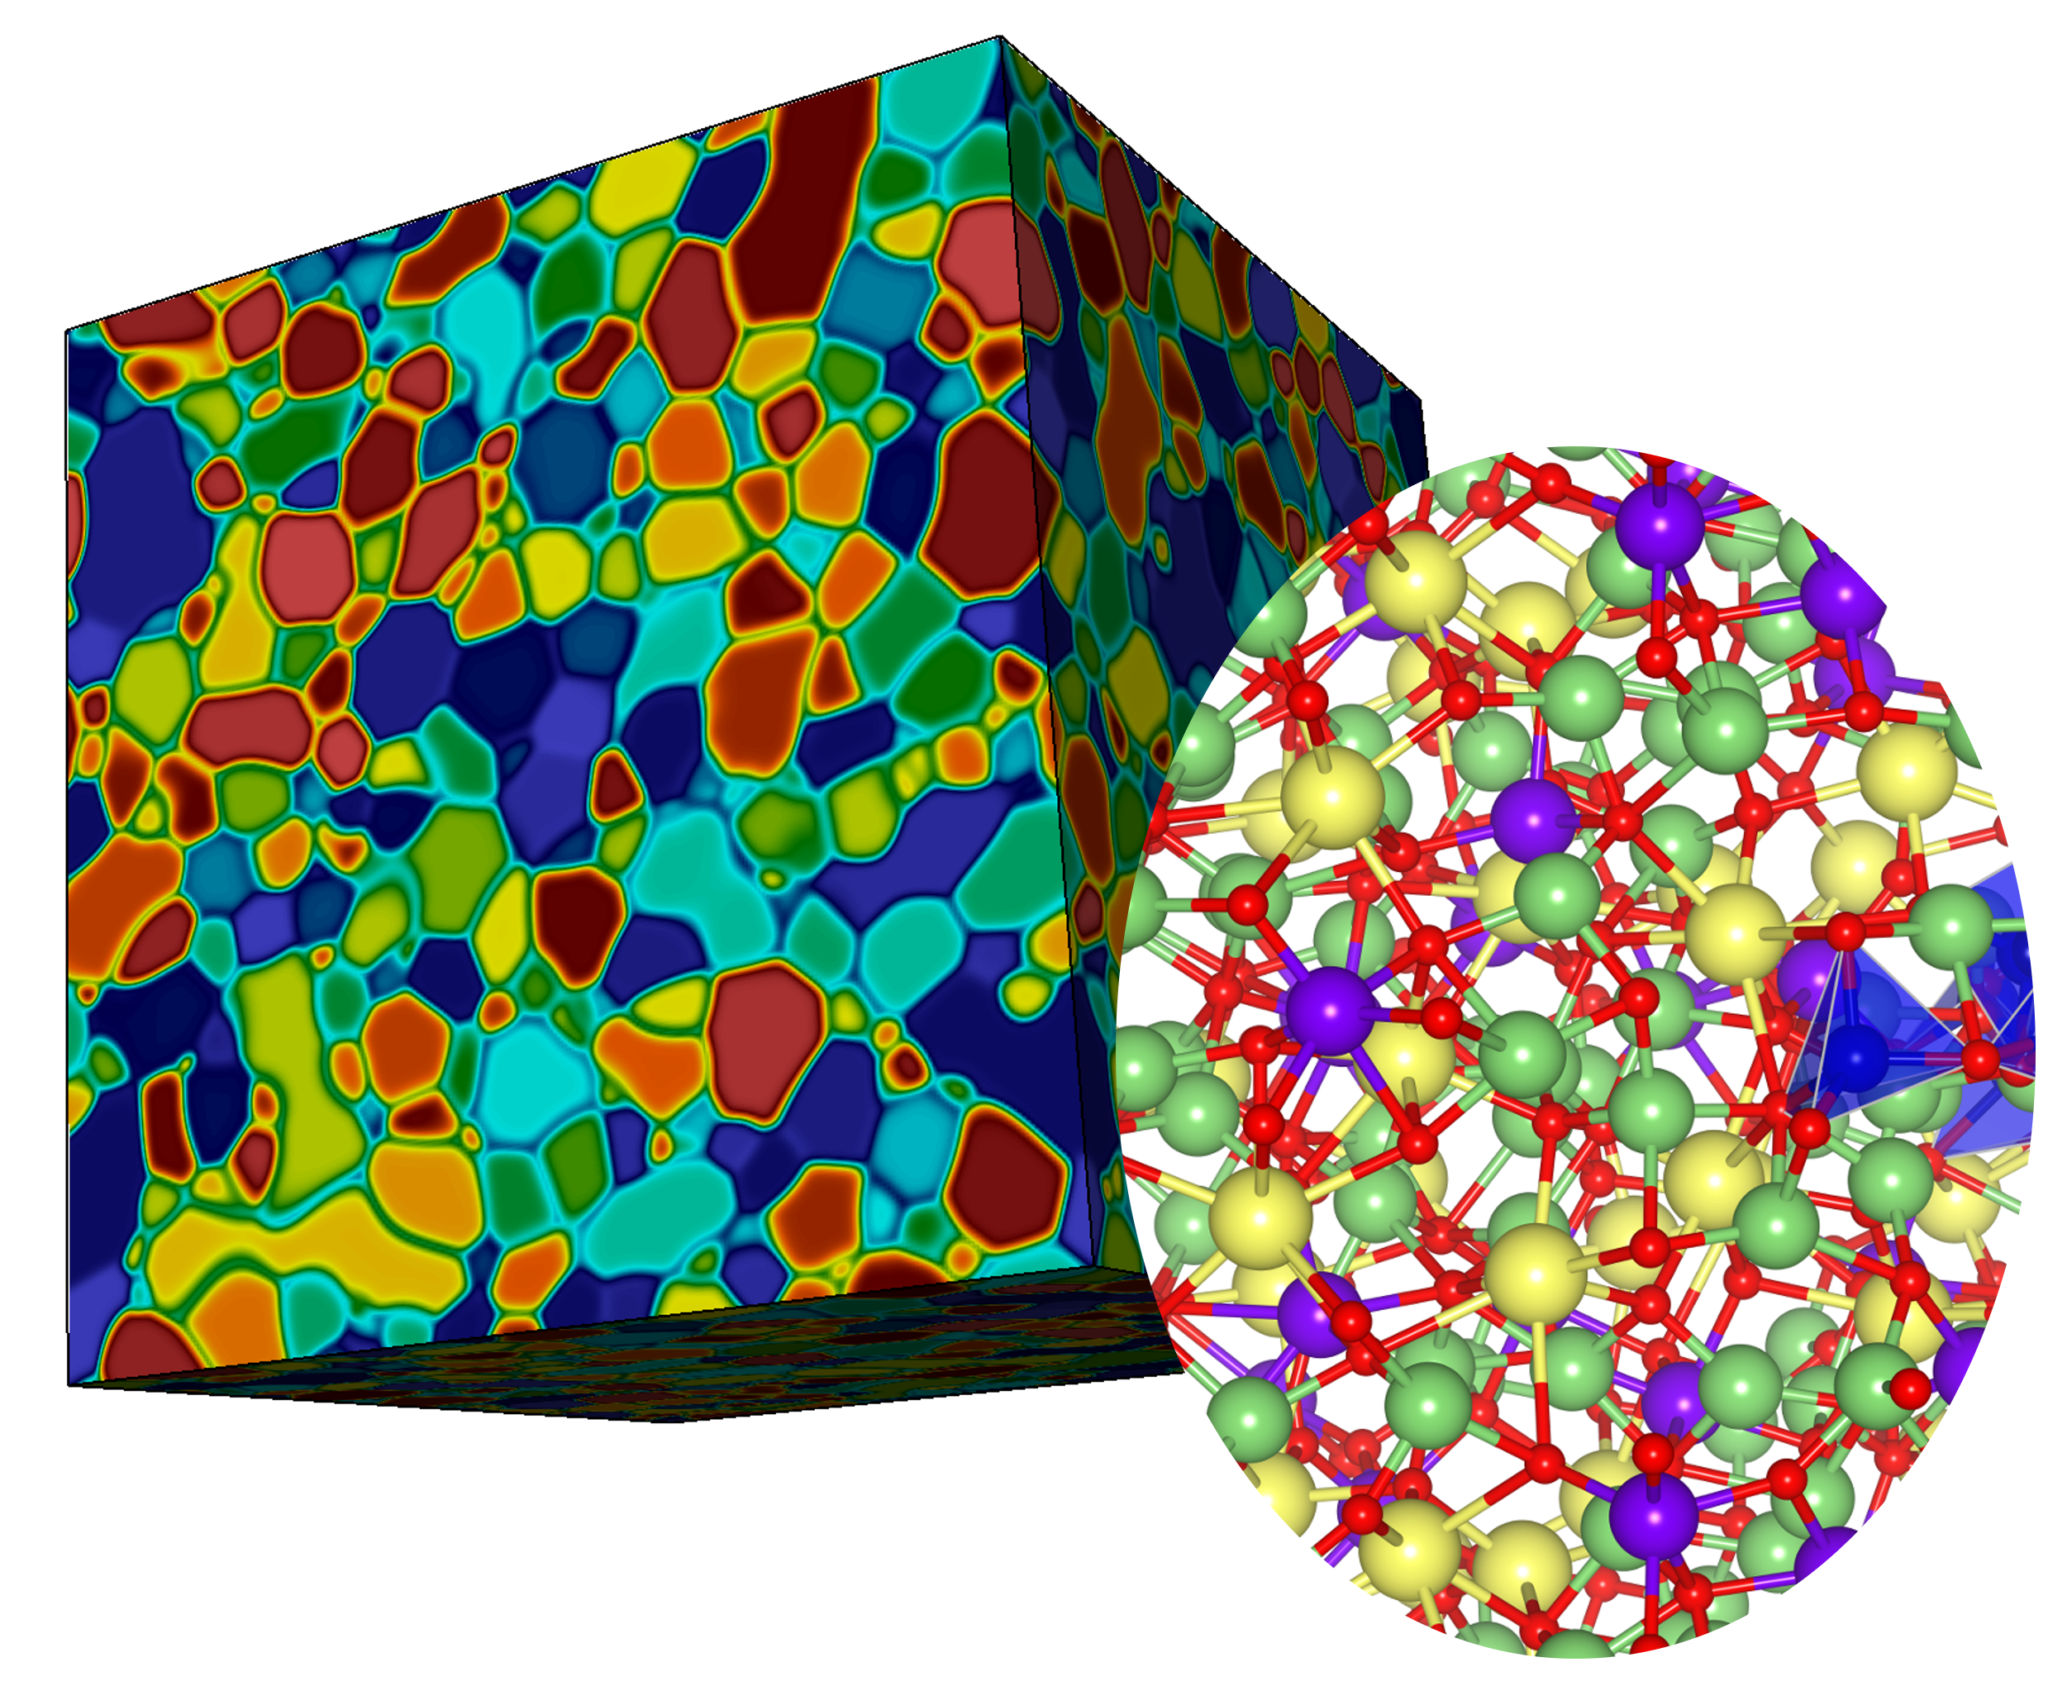 Colored regions show a ceramic solid electrolyte microstructure’s interface arrangements, with an atomistic depiction of the interfacial disordered region. Image courtesy of Brandon Wood/Lawrence Livermore National Laboratory.